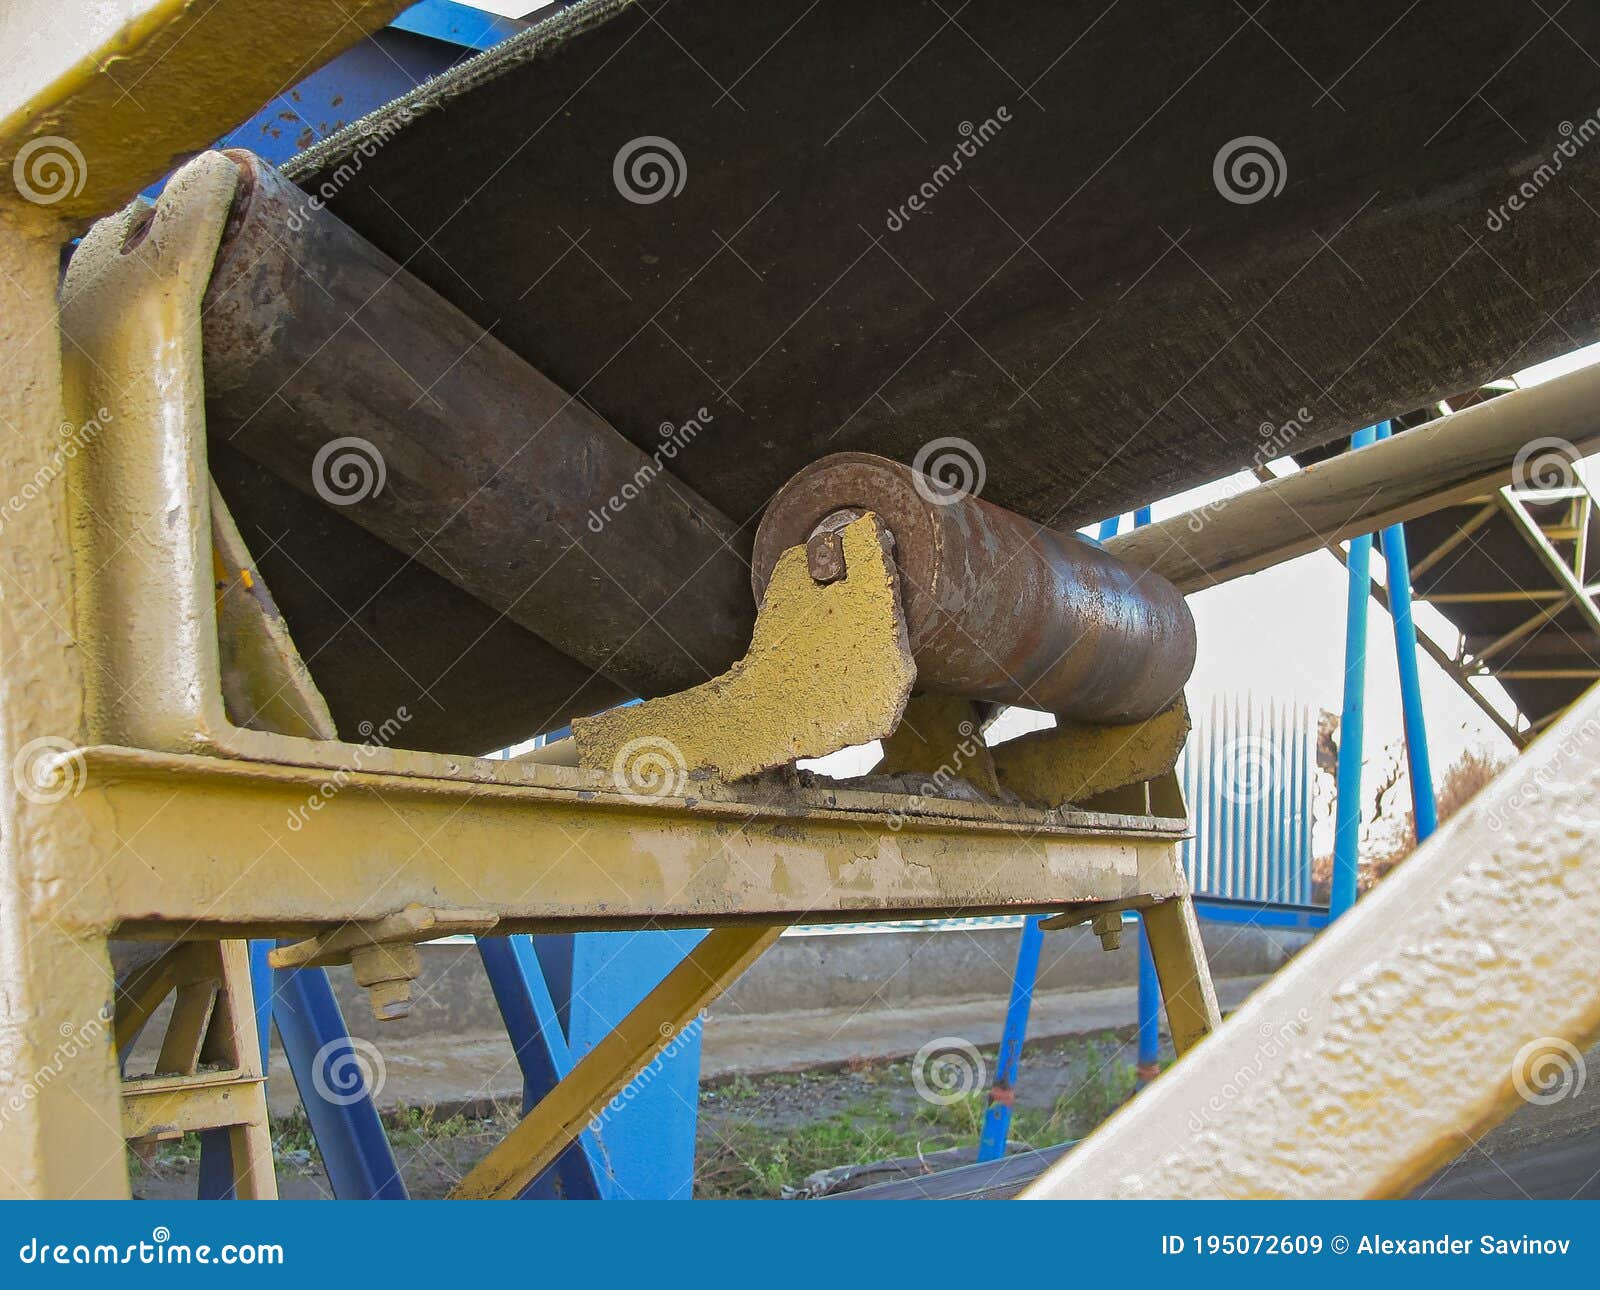 The Design of the Roller Forming Unit of the Upper Branch of the Belt  Conveyor, Useful for Engineers and Students Stock Image - Image of metal,  connections: 195072609